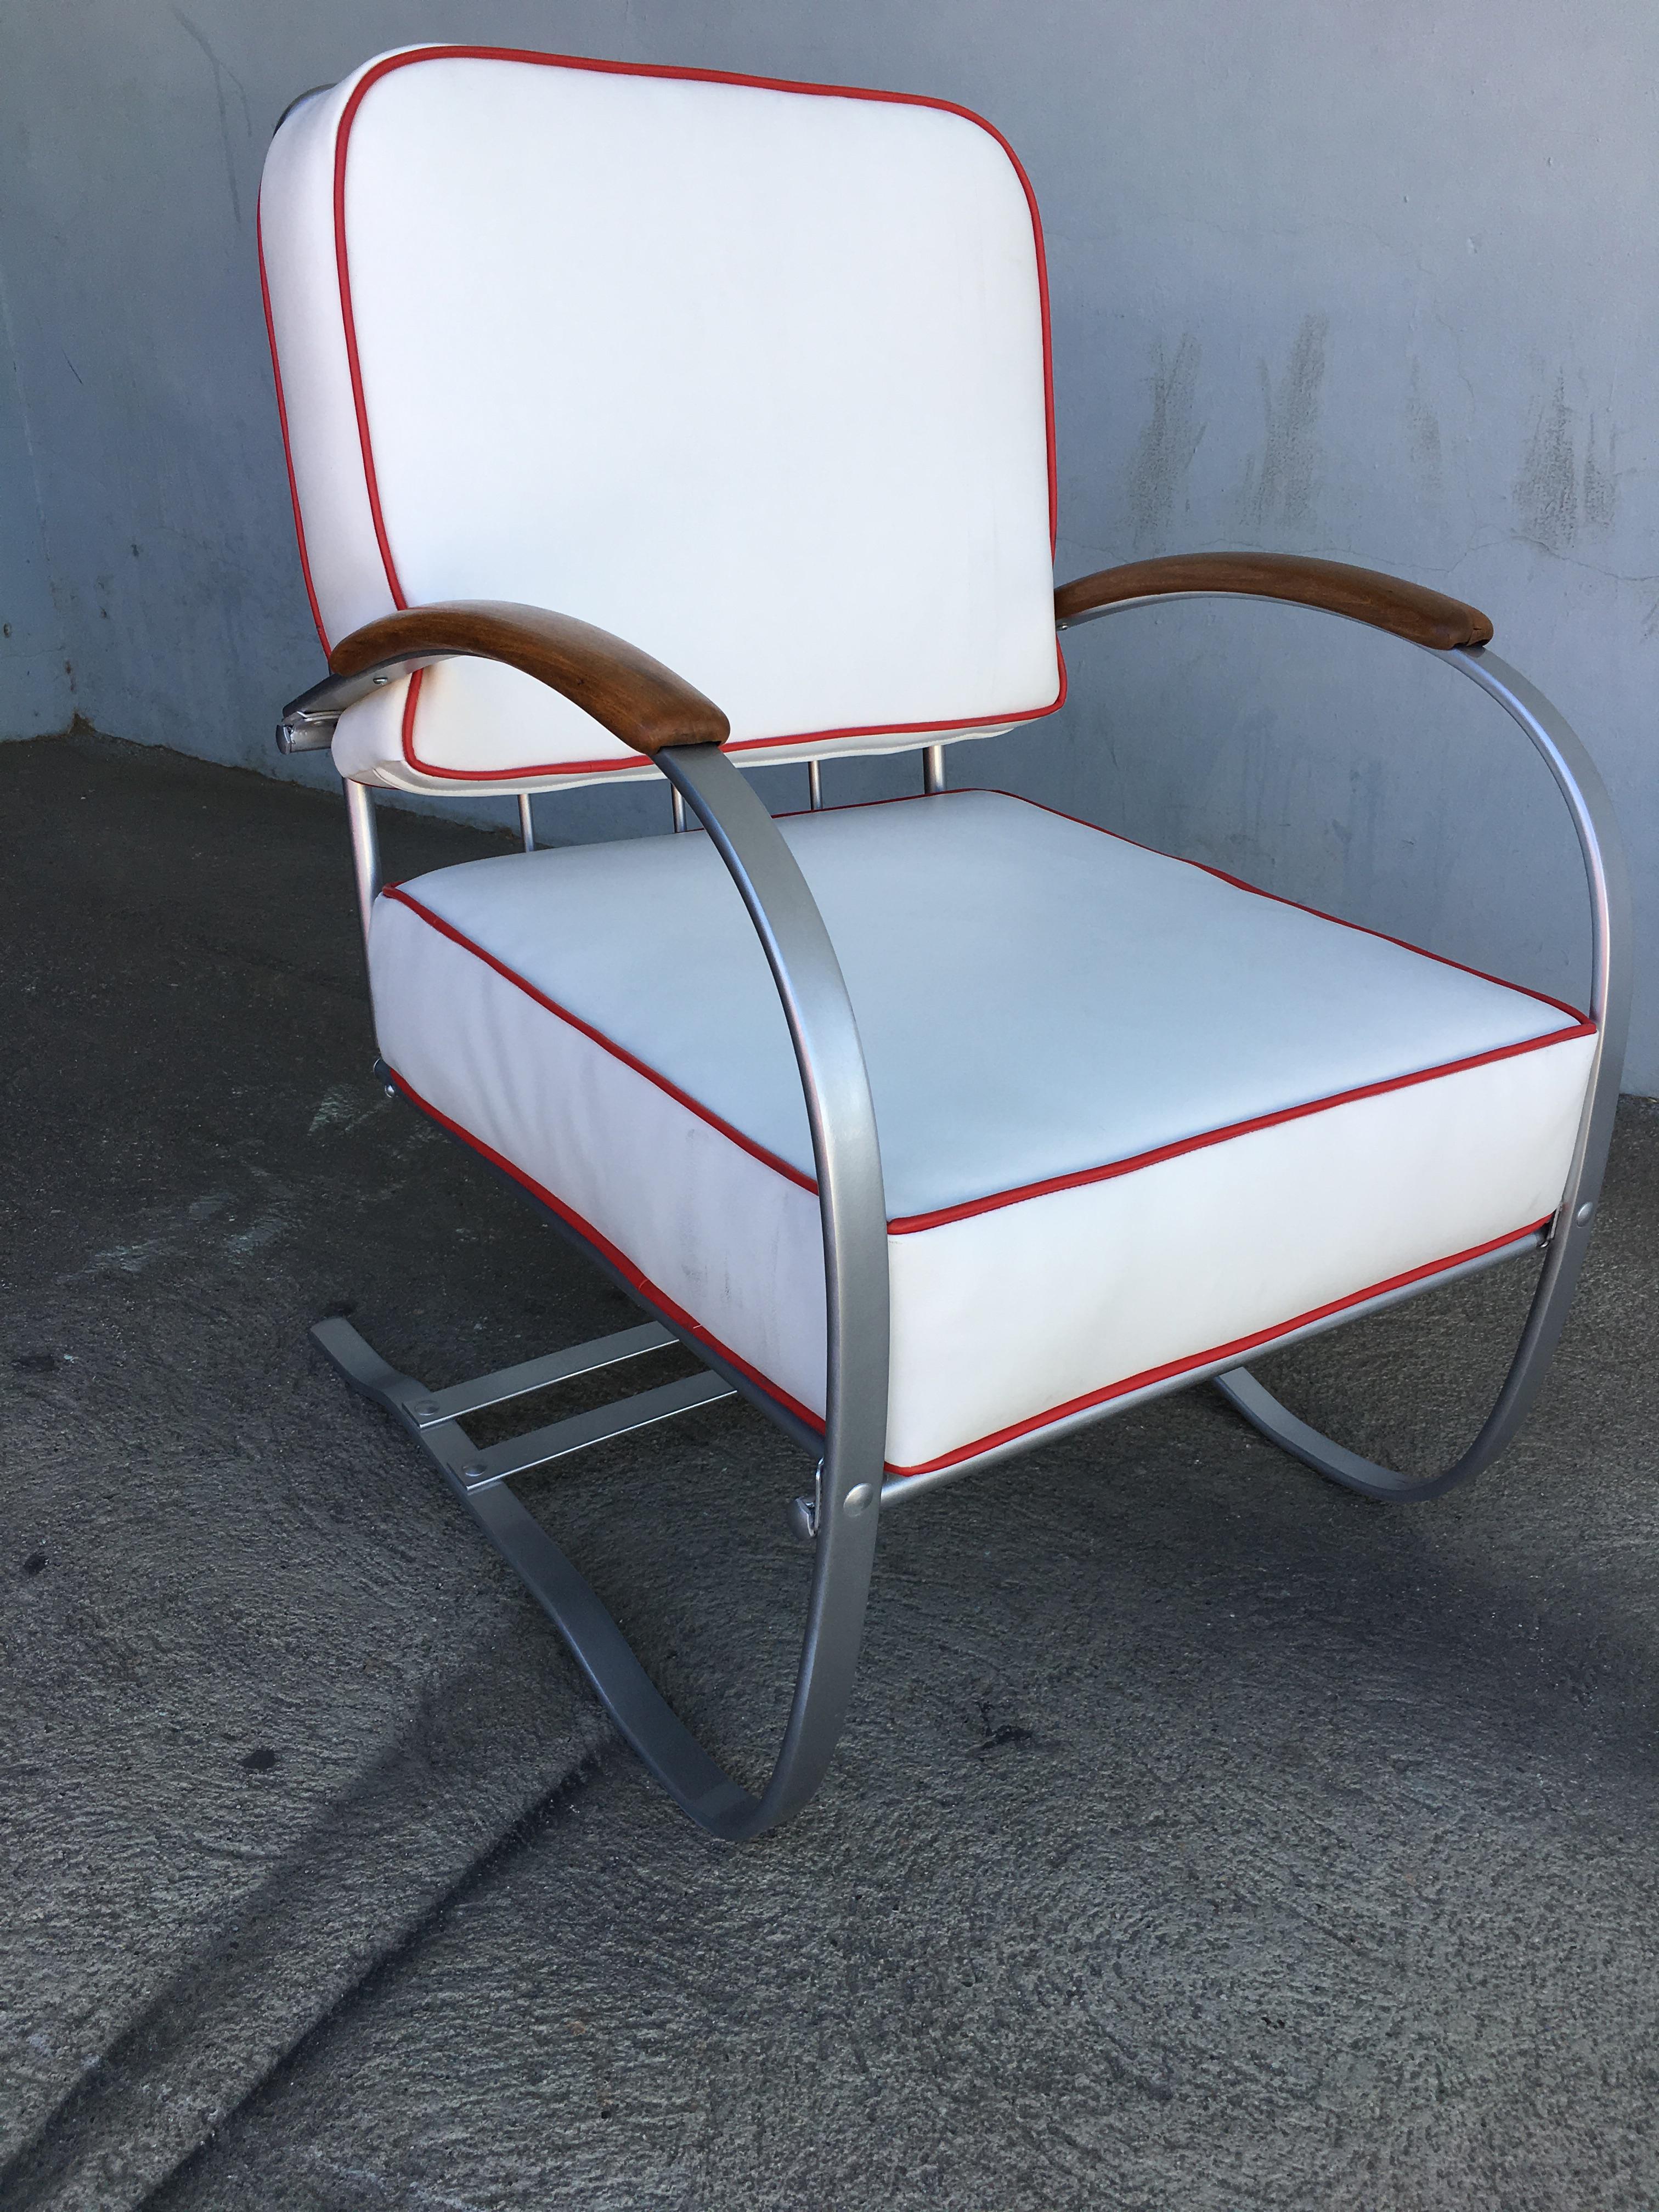 Chrome Wolfgang Hoffmann Art Deco springer lounge chair for Howell furniture, these chairs consist of a tubular chrome frame that seamlessly forms to shape the legs, arms and back support of the streamlined seat. The arms are topped with ebonized